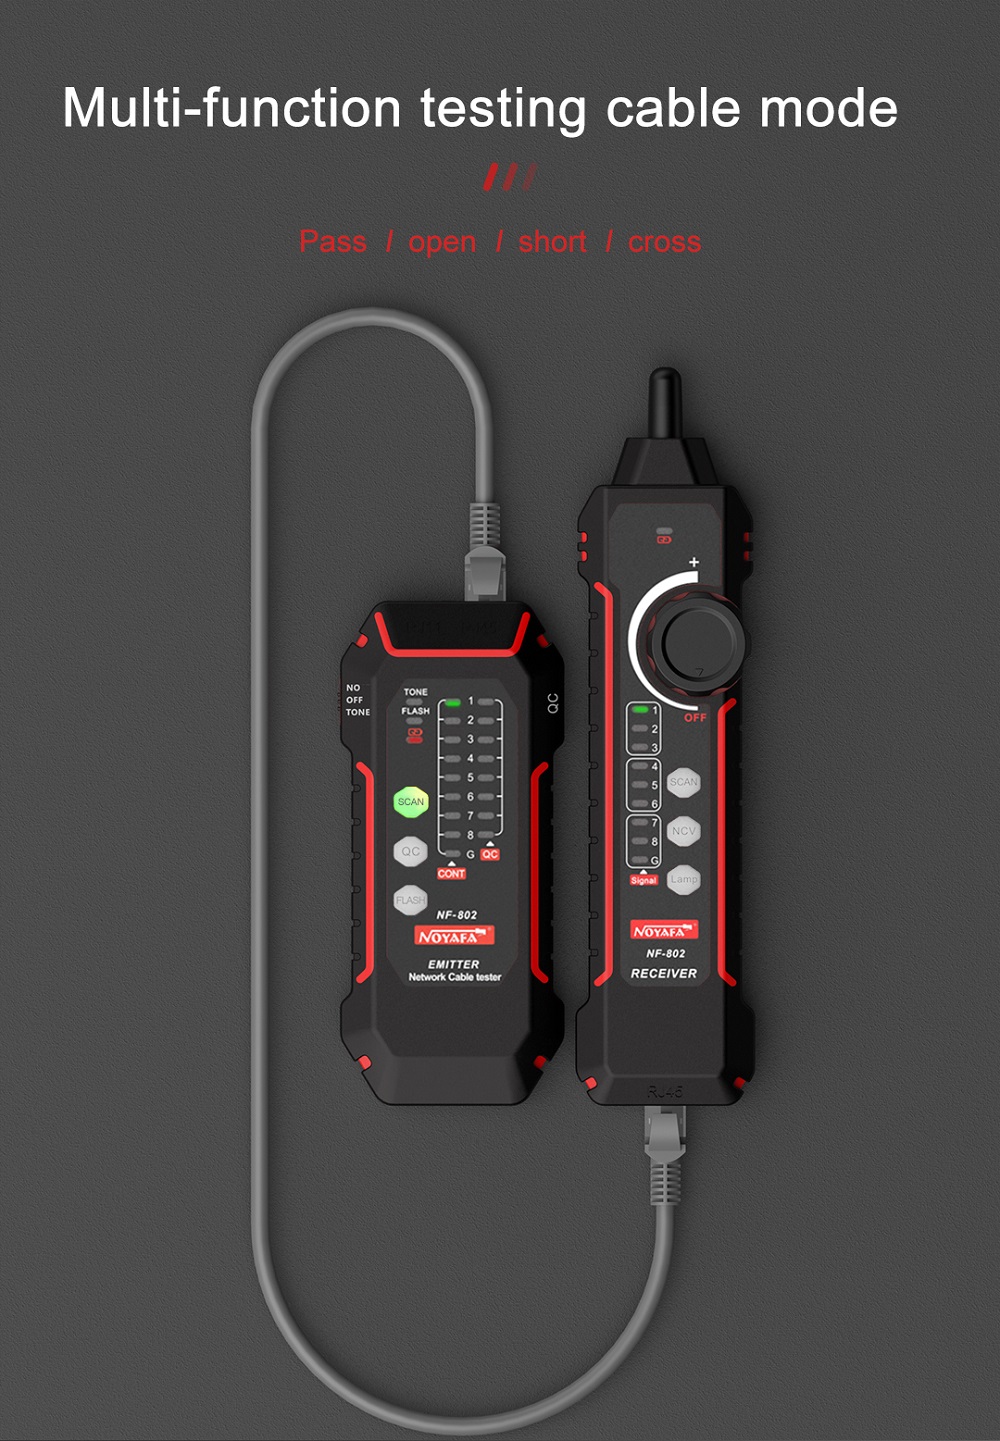 NF-802-Multi-function-Network-Cable-Tester-Tracker-RJ11-RJ45-CAT5-CAT6-LAN-Ethernet-Phone-Wire-Finde-1940386-6